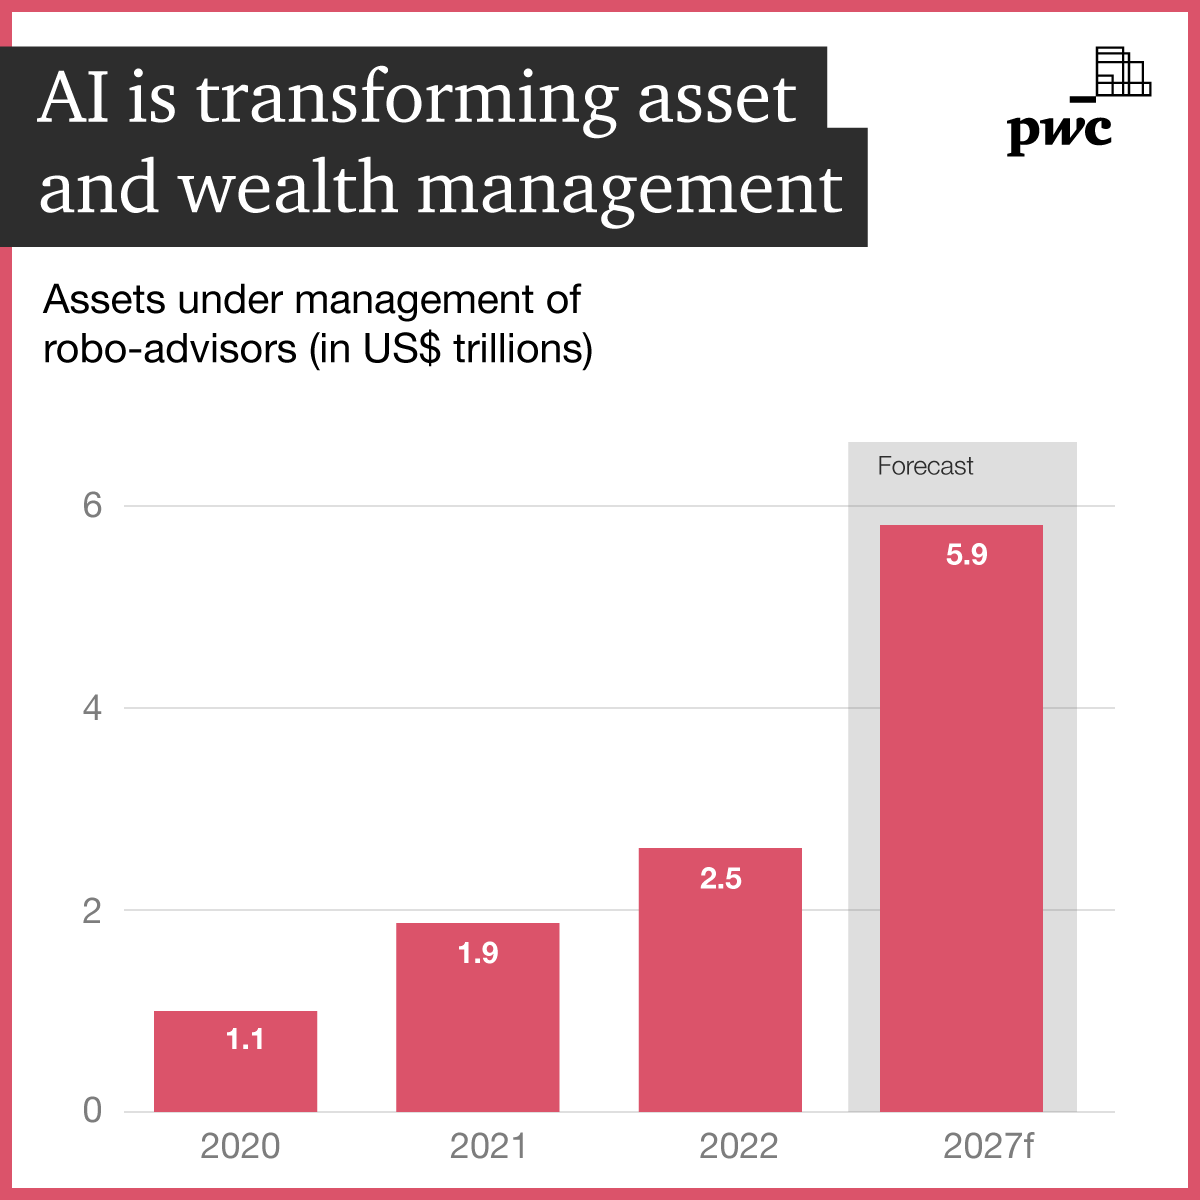 Our Global Asset and Wealth Management Survey paints a portrait of an industry in the throes of unprecedented change. Among the survey’s most striking findings: a projected boom in robo-advice. Learn how industry leaders can avoid being left behind by following these four steps:…